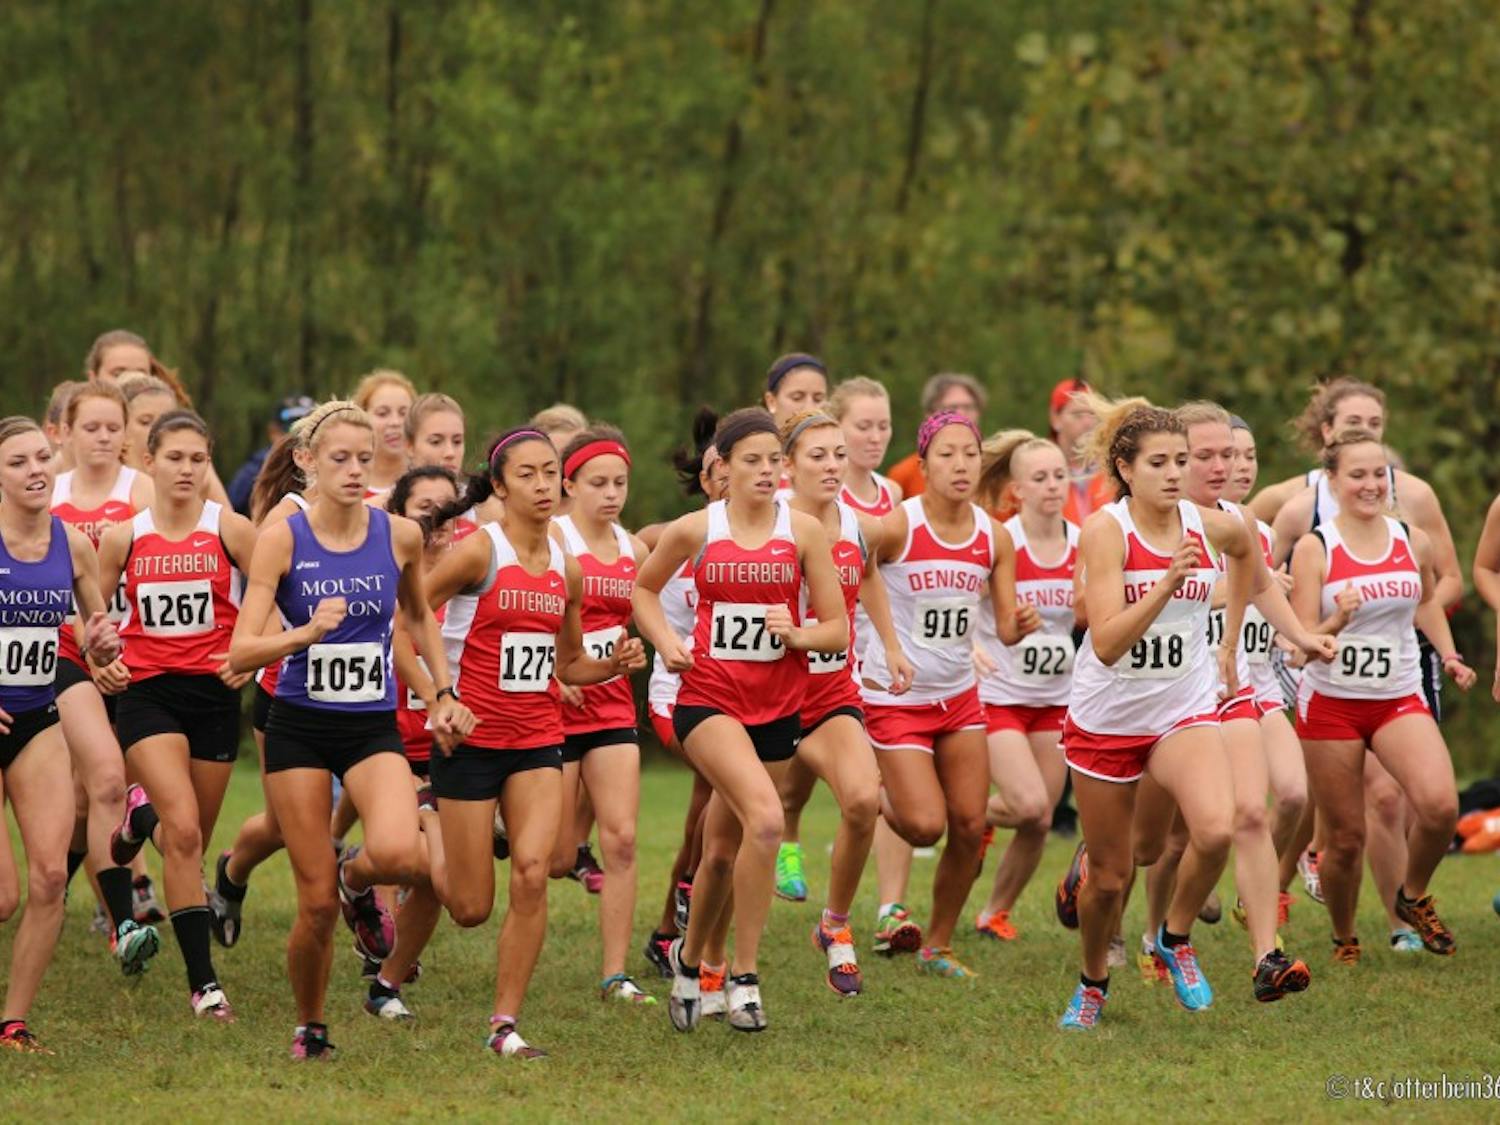 	The Cardinals start the race off strong, coming out of the gate as a team.